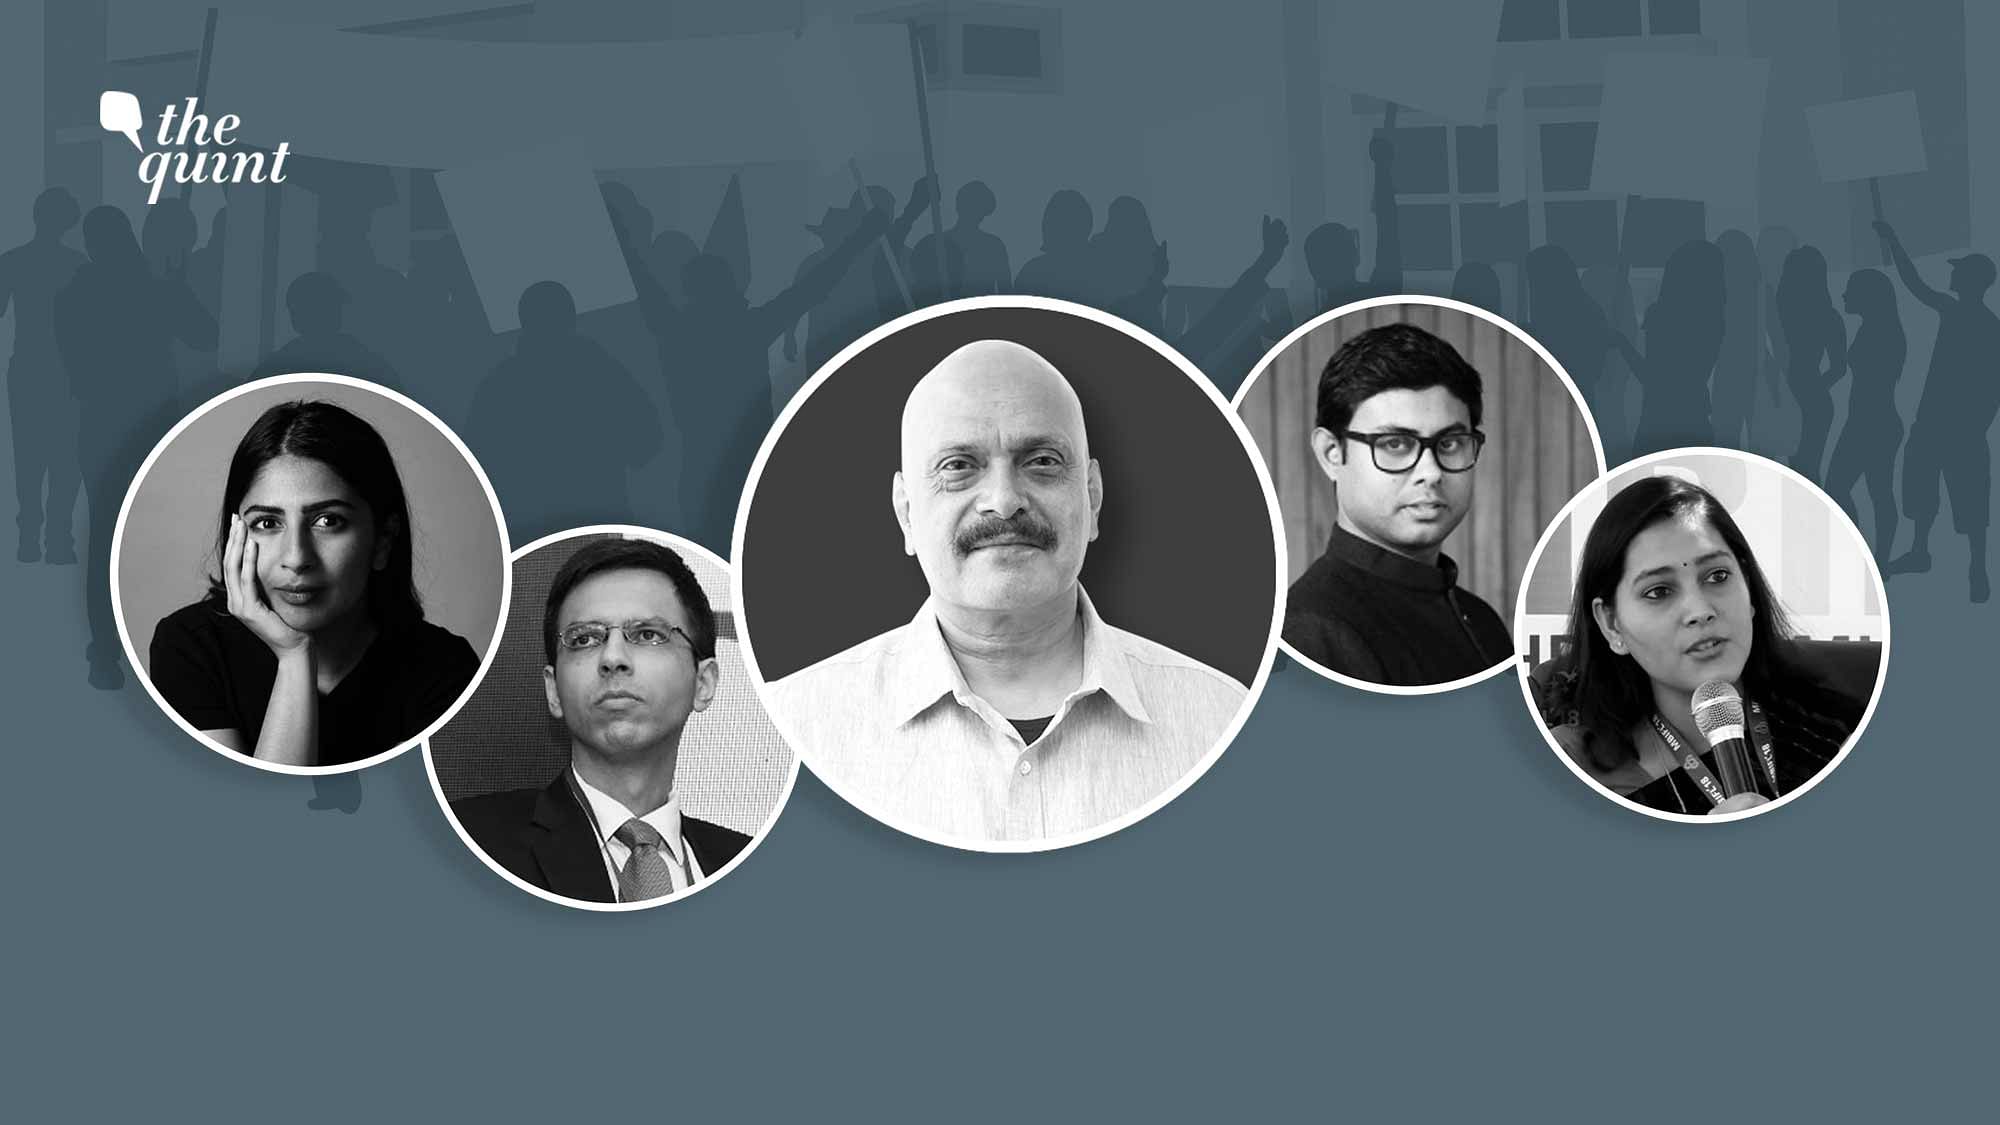 <div class="paragraphs"><p>The Quint's Editor-in-Chief Raghav Bahl chaired a debate on students' protests at a literature festival in Mumbai.</p></div>